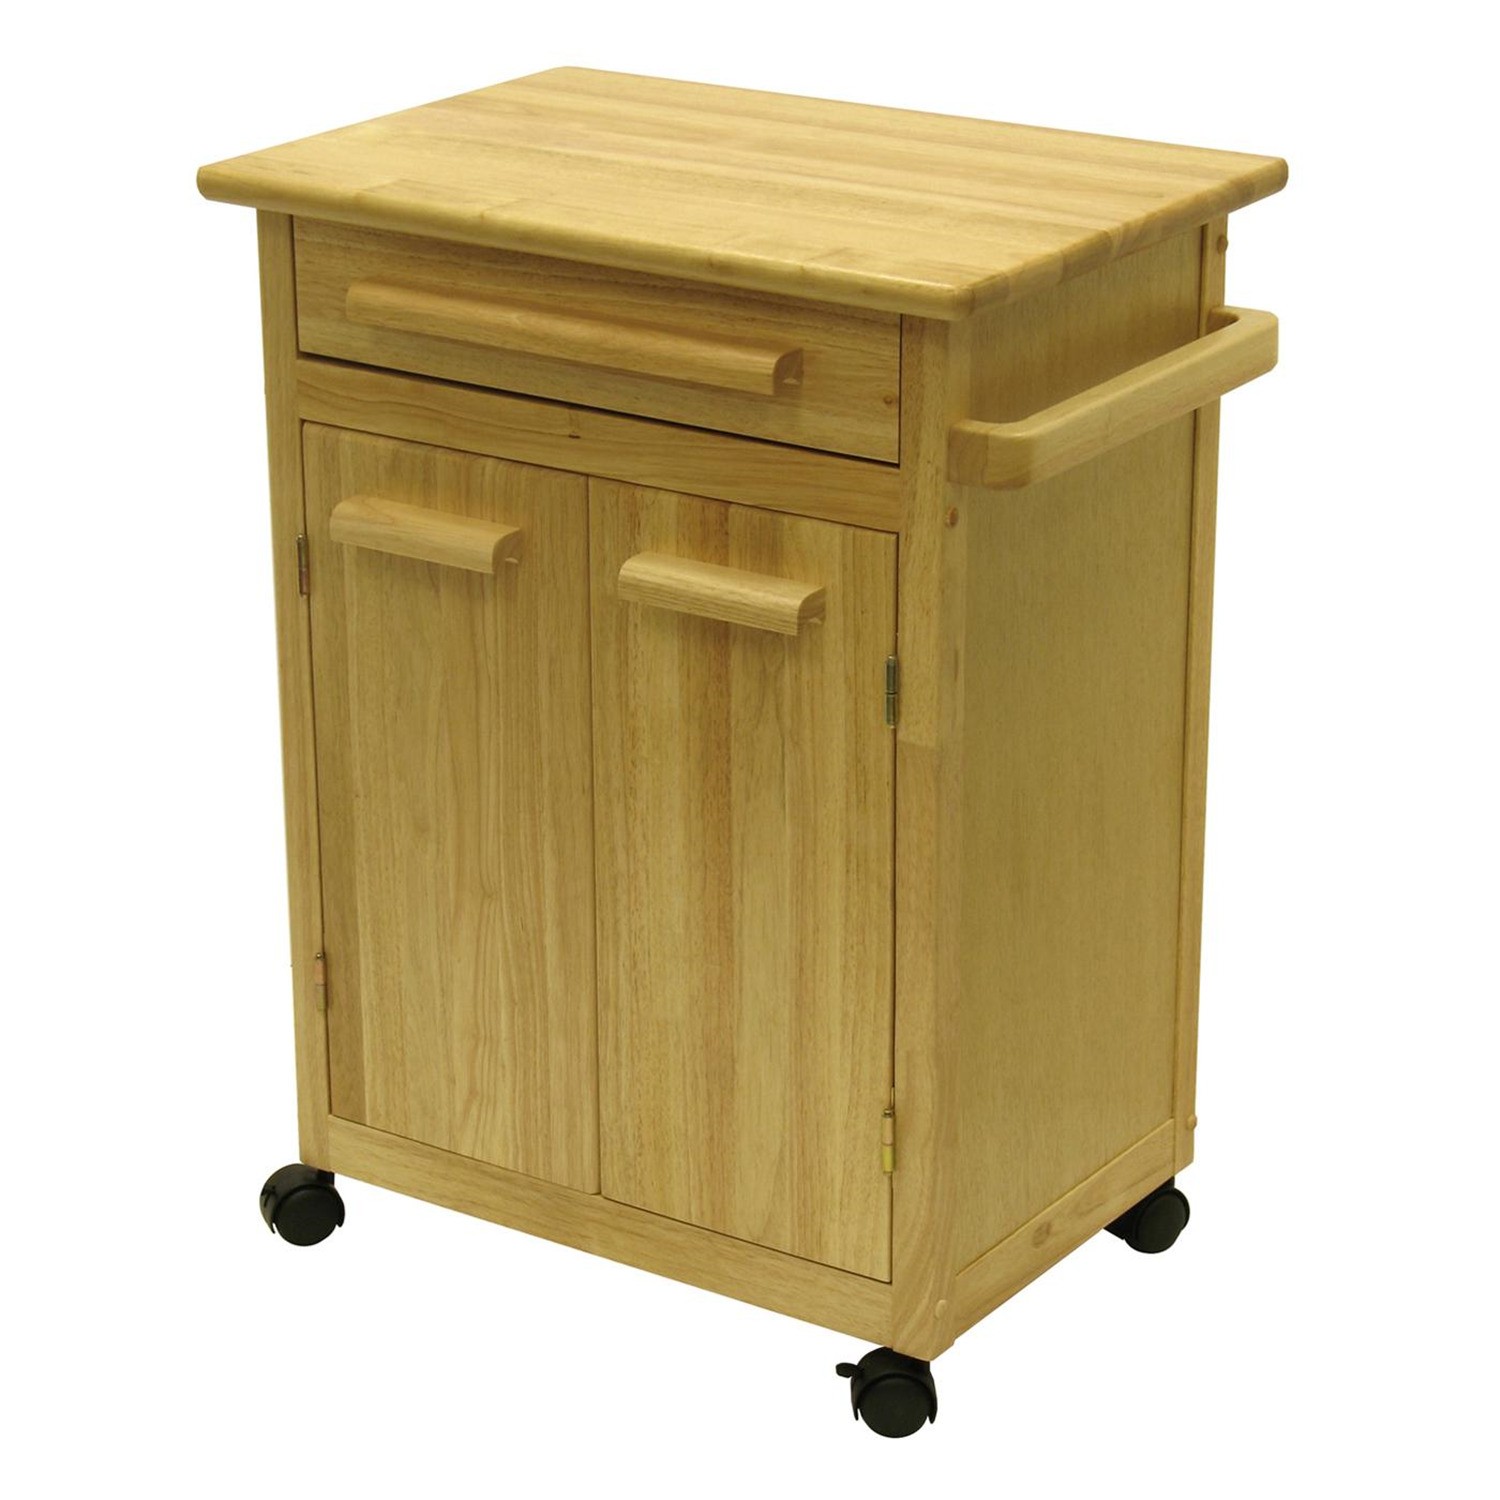 Winsome Wood Single Drawer Storage Cart, Natural